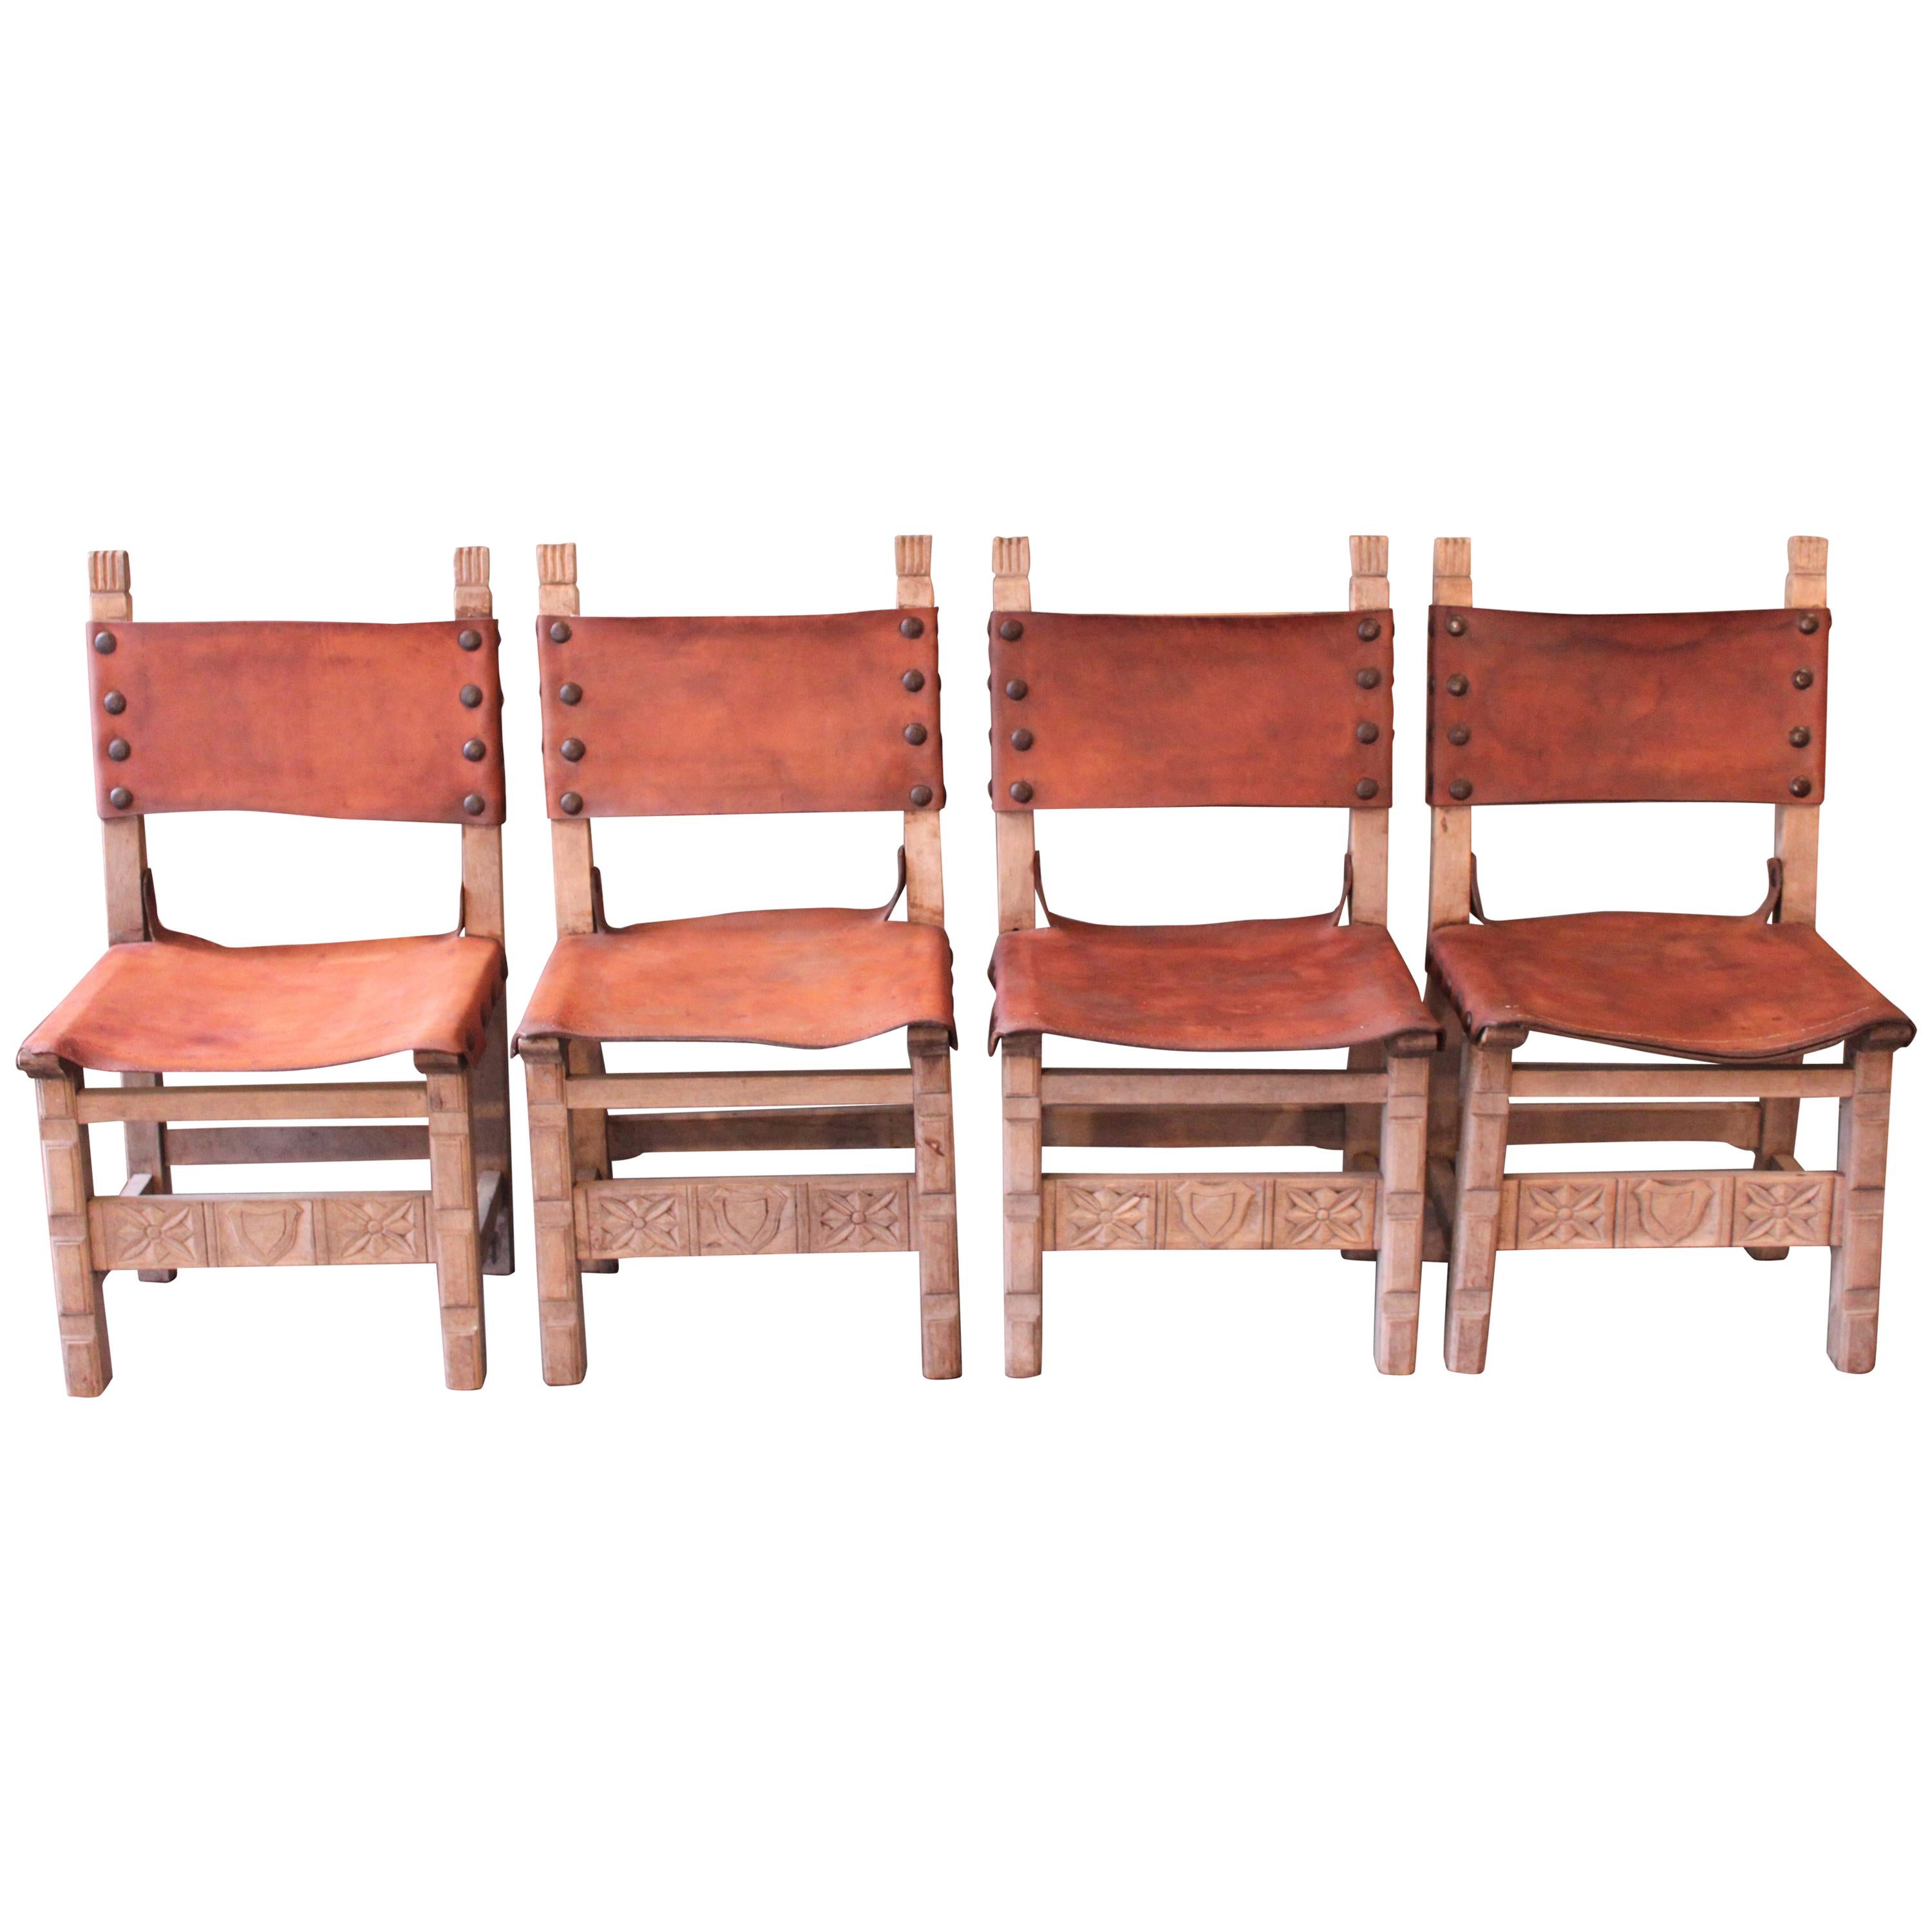 Mid-20th Century Rustic Spanish Dining Room Chairs from a German Hunting Château For Sale